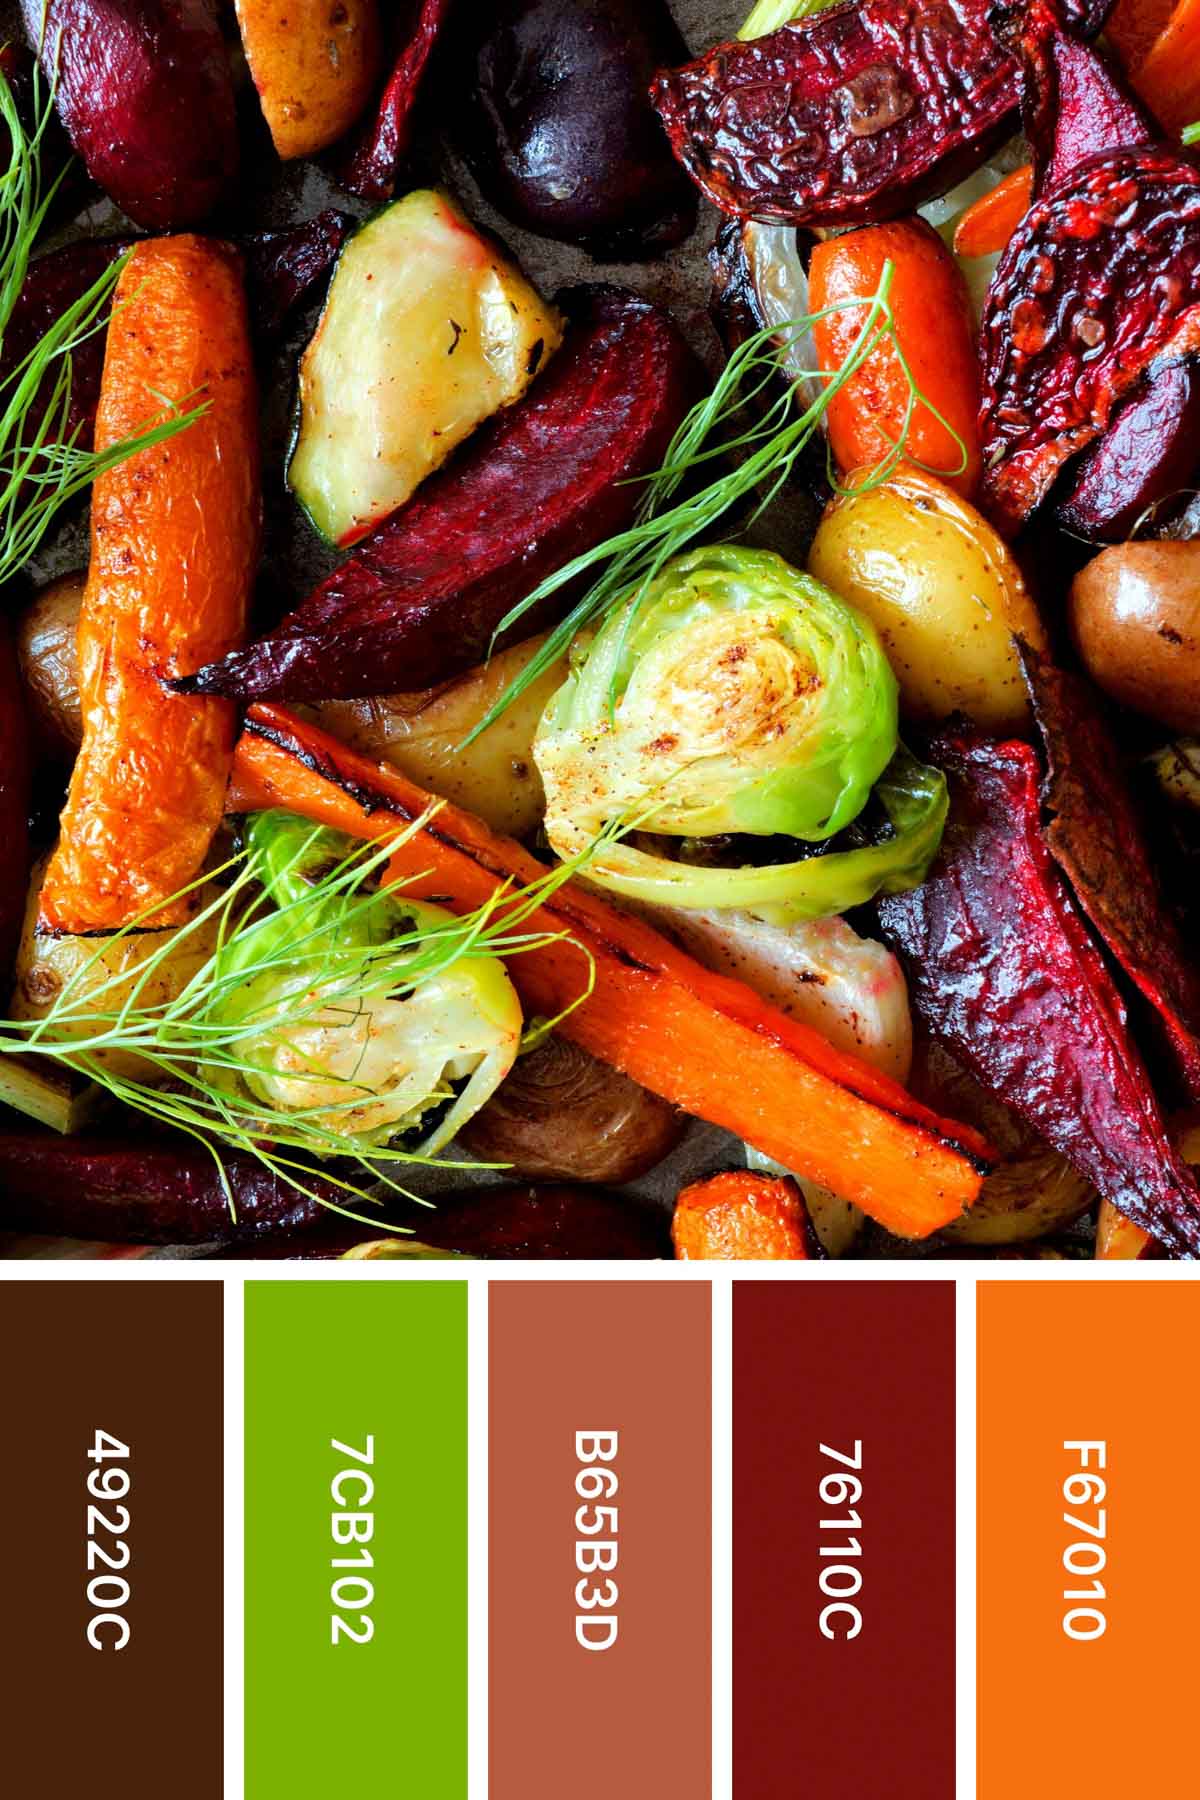 roasted root vegetables with an inspired fall color palette underneath